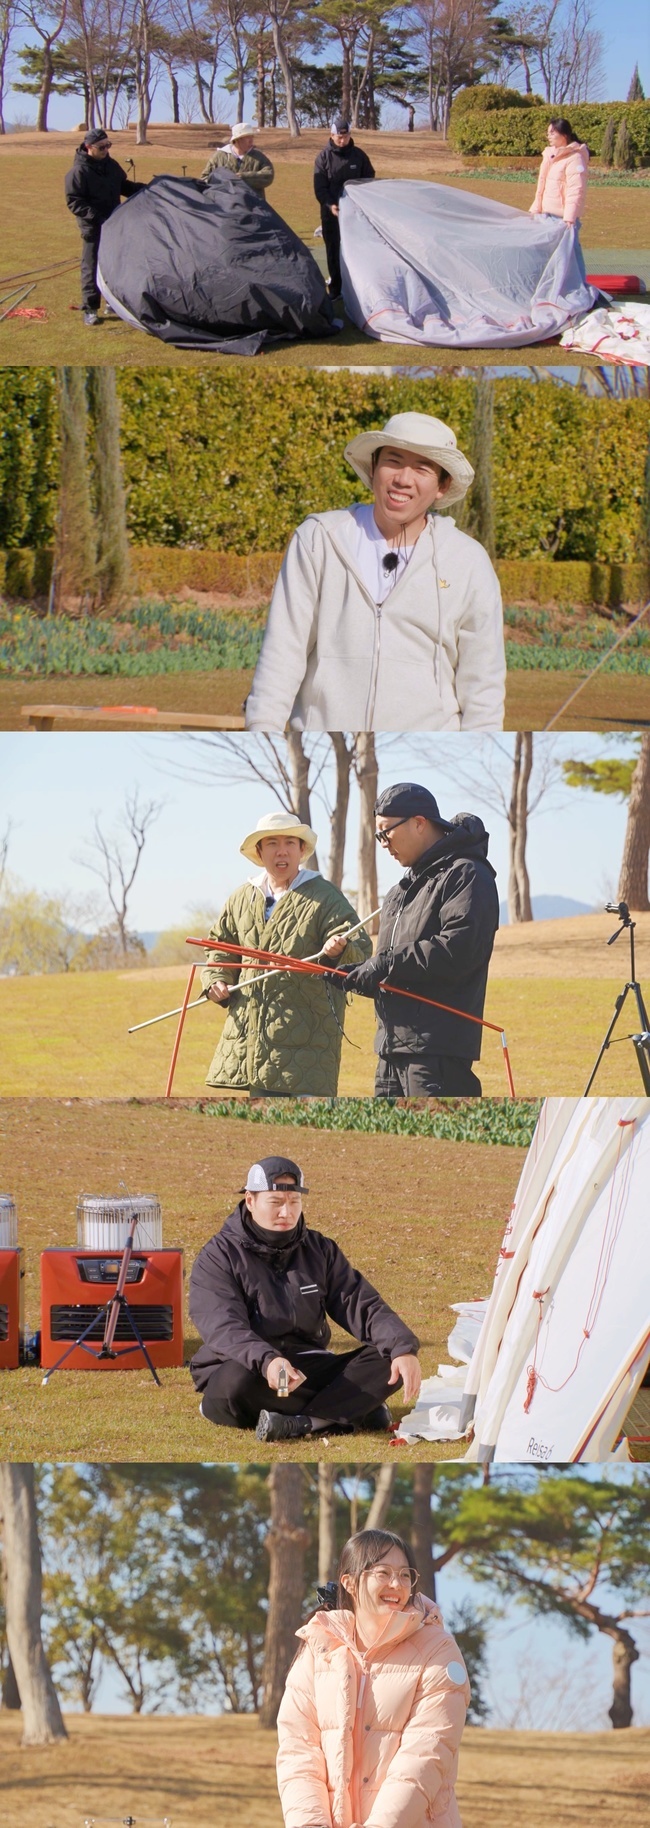 The Running Man members have left Androsace umbellata Camping.In the SBS  ⁇  Running Man ⁇  broadcast on March 26, the members who arrived at the Camping site found the camping equipment piled up, and  ⁇ Tent was the first to hit it.Members began assembling Tent, led by Yang Se-chan, who had a career in Camping.I do not want to fight, I do not want to be annoyed, I promise to be a loving Camping, but I can not bear my anger, so I was expecting an unfavorable Camping.